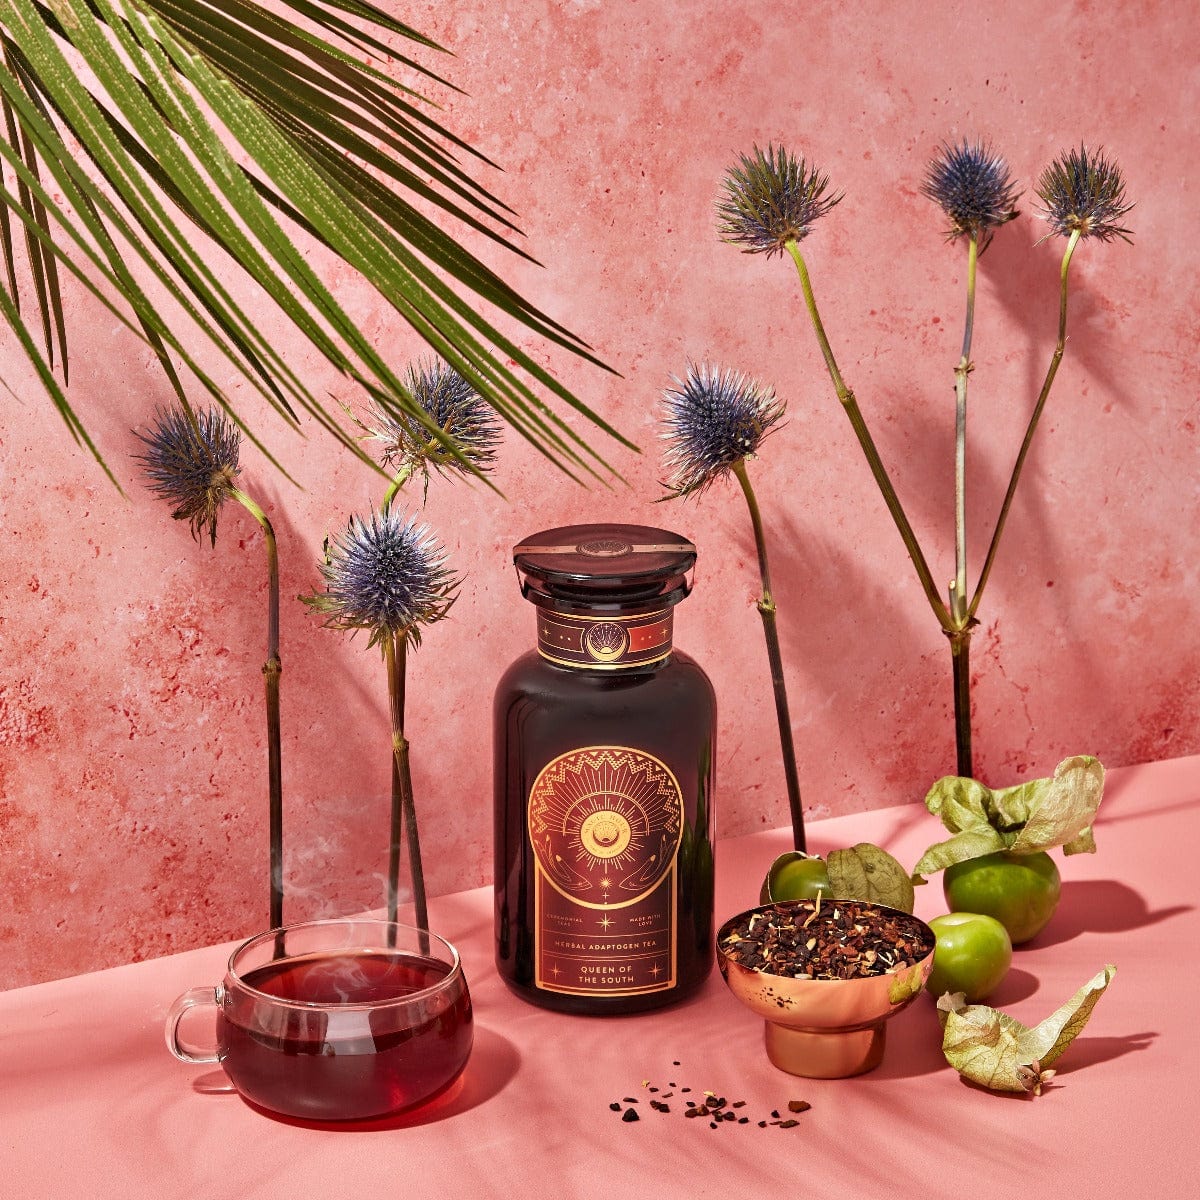 A dark bottle with a sun emblem stands on a pink surface surrounded by exotic flowers, green fruits, a teacup filled with a dark red liquid, and a bowl of organic loose leaf tea. A large green leaf dangles from above, set against a textured pink background. Magic Hour Queen of the South: Delicious Cocoa Detox Tea awaits your senses.